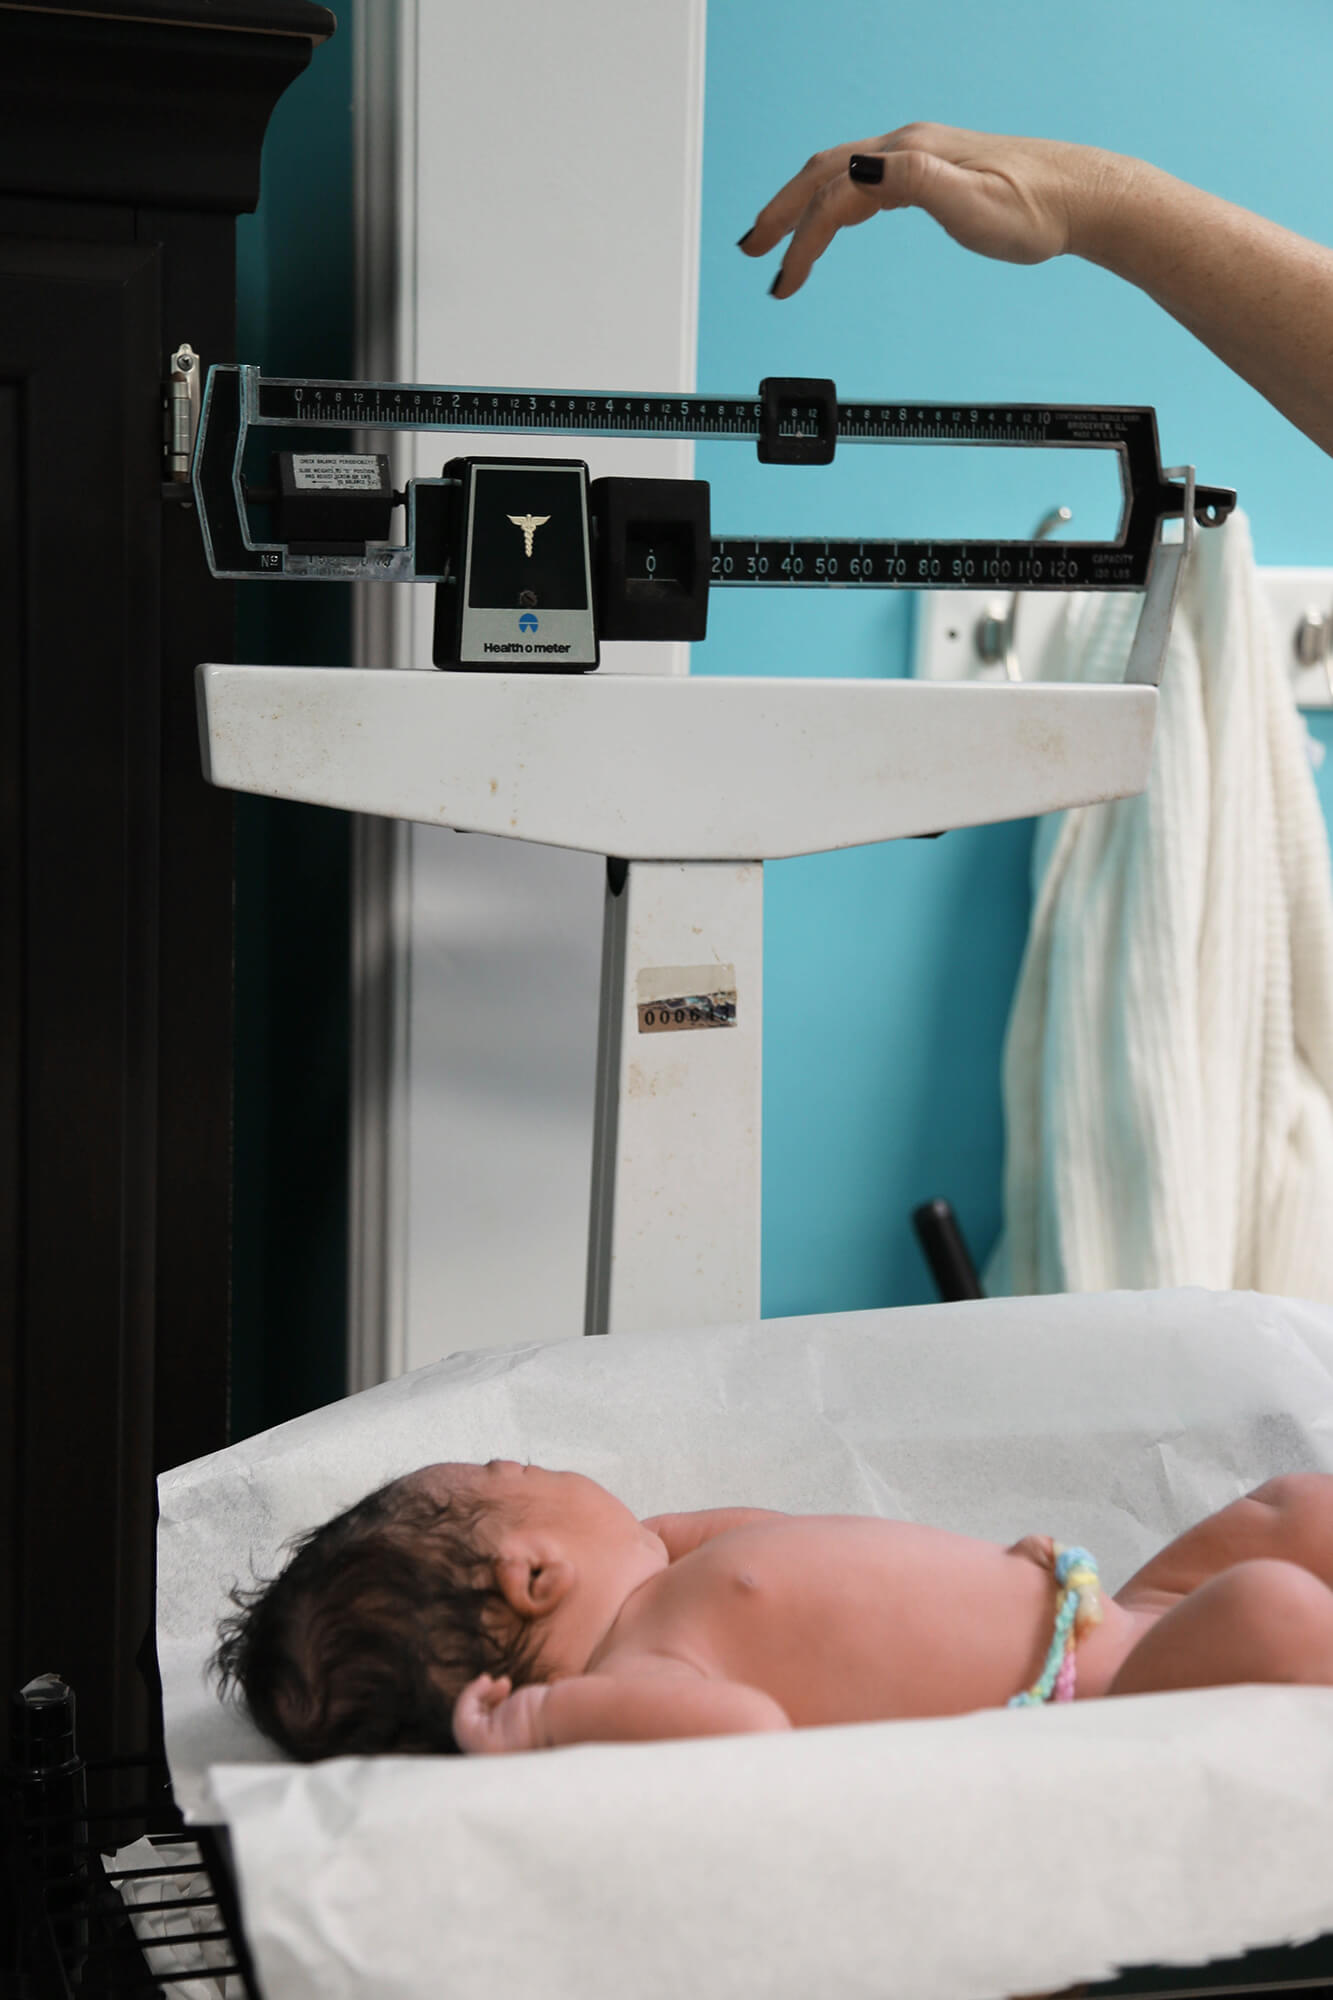 Doula working weighing baby right after her birth